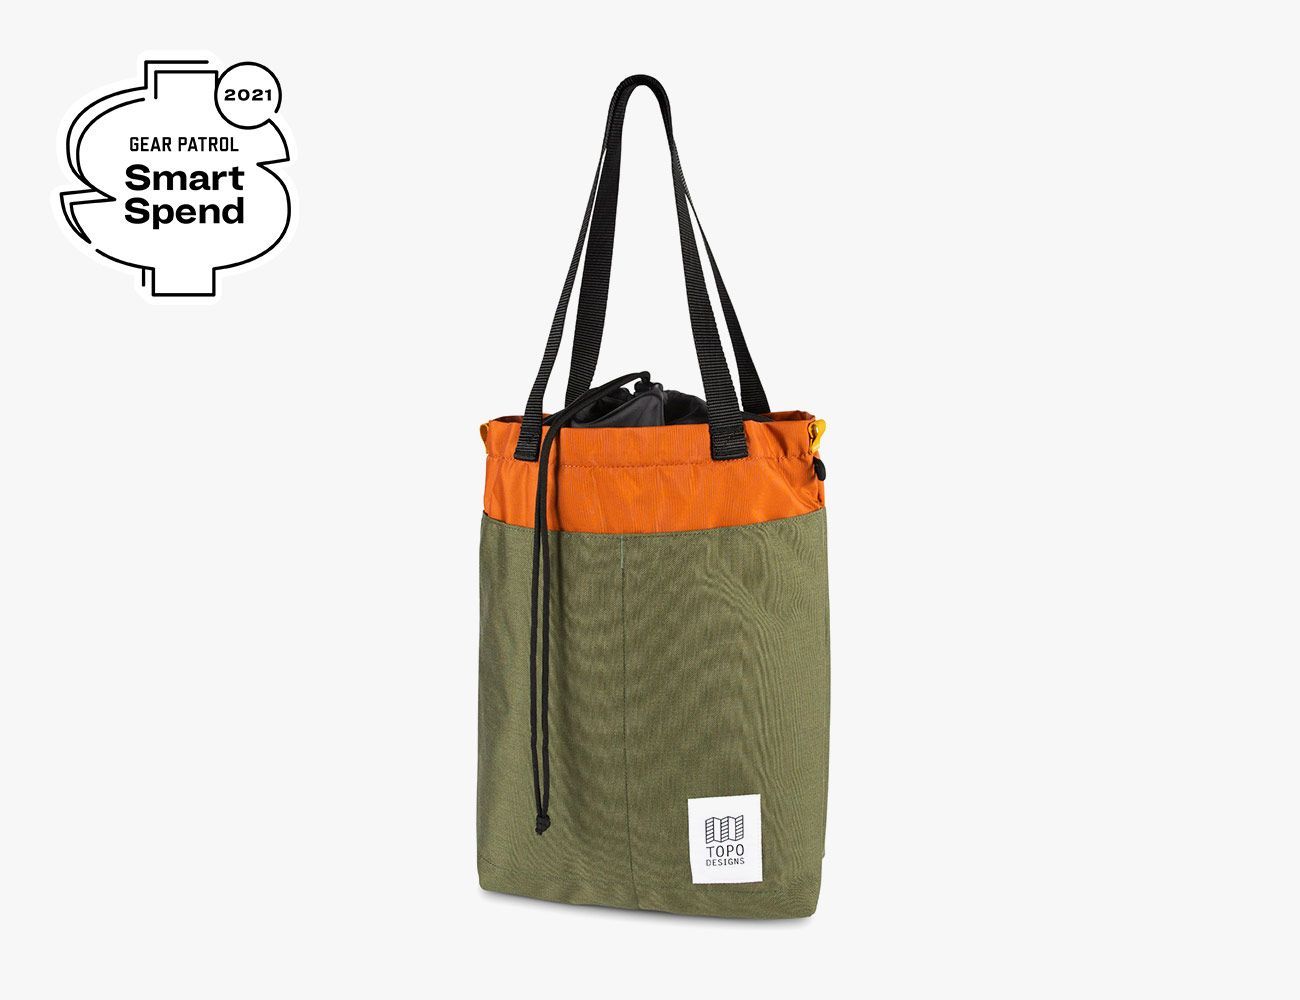 Yeti Camino Carryall vs RTIC Large Tote Bag, side by side comparison